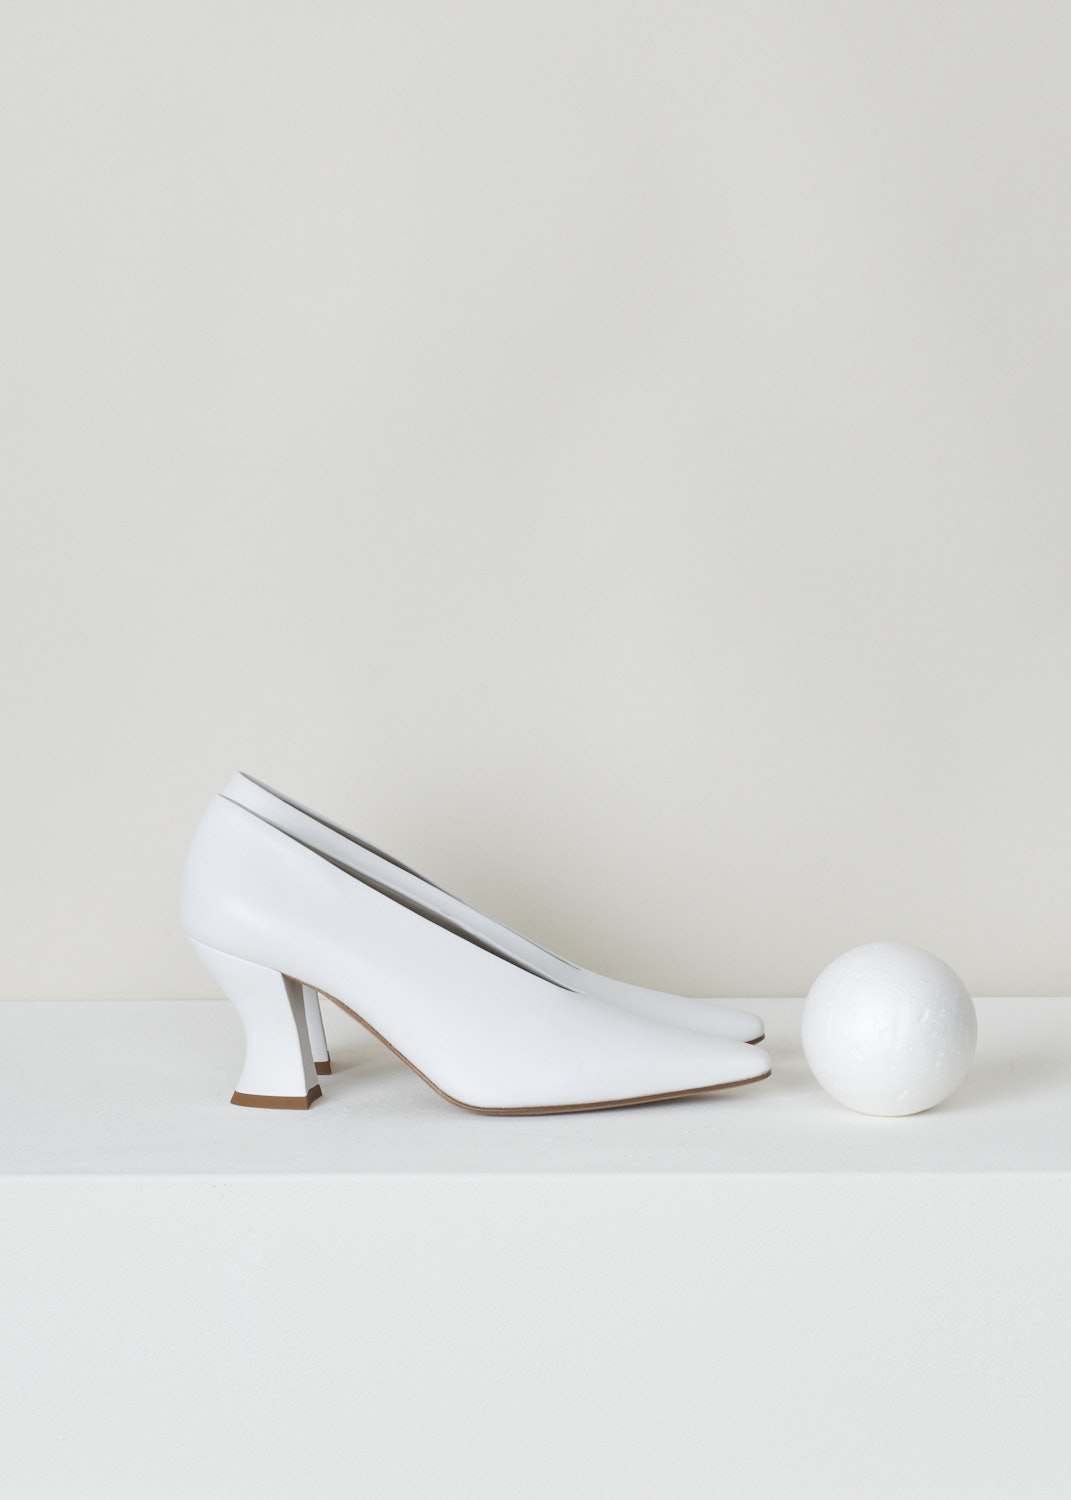 Bottega Veneta, White chalky pumps, 608839_VBSD0_9122_optic_white, white, side,  Made from smooth chalky colored leather, featuring a spool heel, an elongated toes and a high vamp.

Heel height: 7 cm / 2.7 inch.